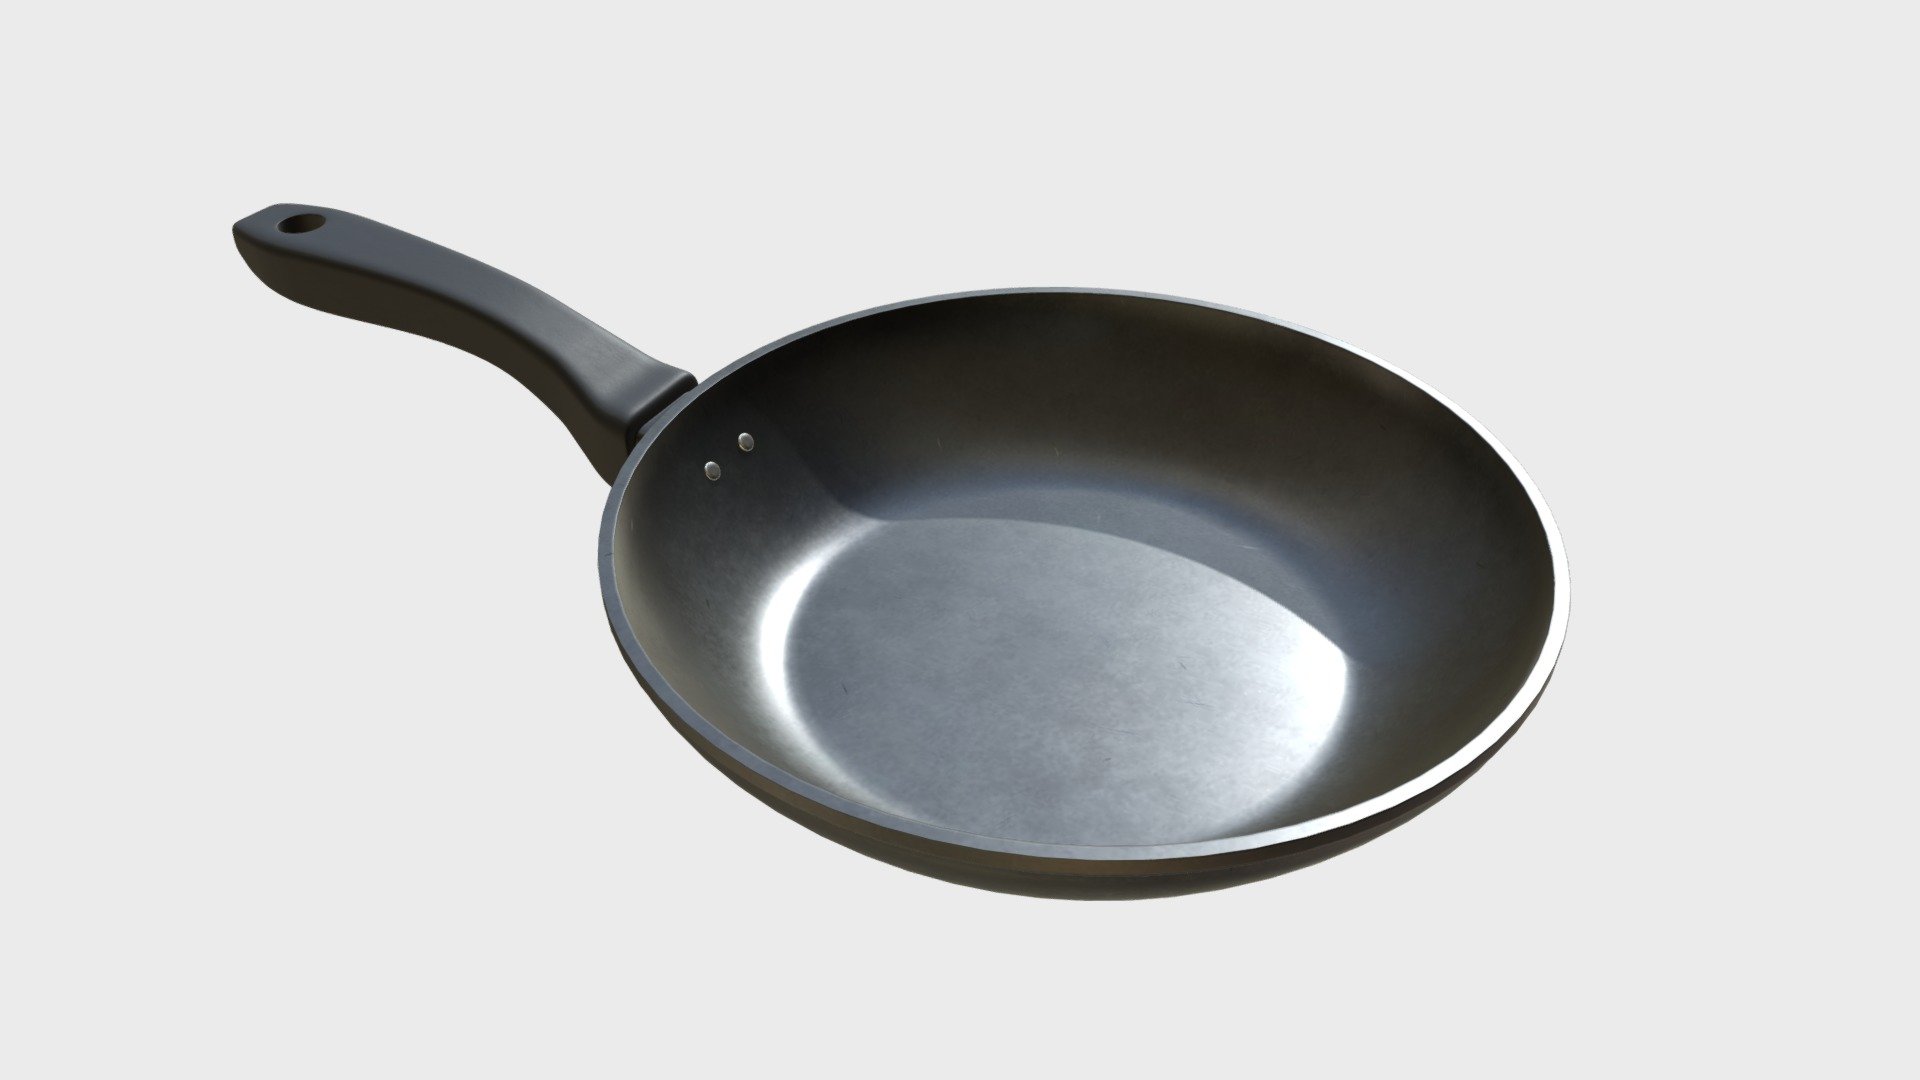 === The following description refers to the additional ZIP package provided with this model ===

Frying pan 3D Model. Production-ready 3D Model, with PBR materials, textures, non overlapping UV Layout map provided in the package.

Quads only geometries (no tris/ngons).

Formats included: FBX, OBJ; scenes: BLEND (with Cycles / Eevee PBR Materials and Textures); other: png with Alpha.

1 Object (mesh), 1 PBR Material, UV unwrapped (non overlapping UV Layout map provided in the package); UV-mapped Textures.

UV Layout maps and Image Textures resolutions: 2048x2048; PBR Textures made with Substance Painter.

Polygonal, QUADS ONLY (no tris/ngons); 16735 vertices, 16676 quad faces (33352 tris).

Real world dimensions; scene scale units: cm in Blender 3.3 (that is: Metric with 0.01 scale).

Uniform scale object (scale applied in Blender 3.3) 3d model